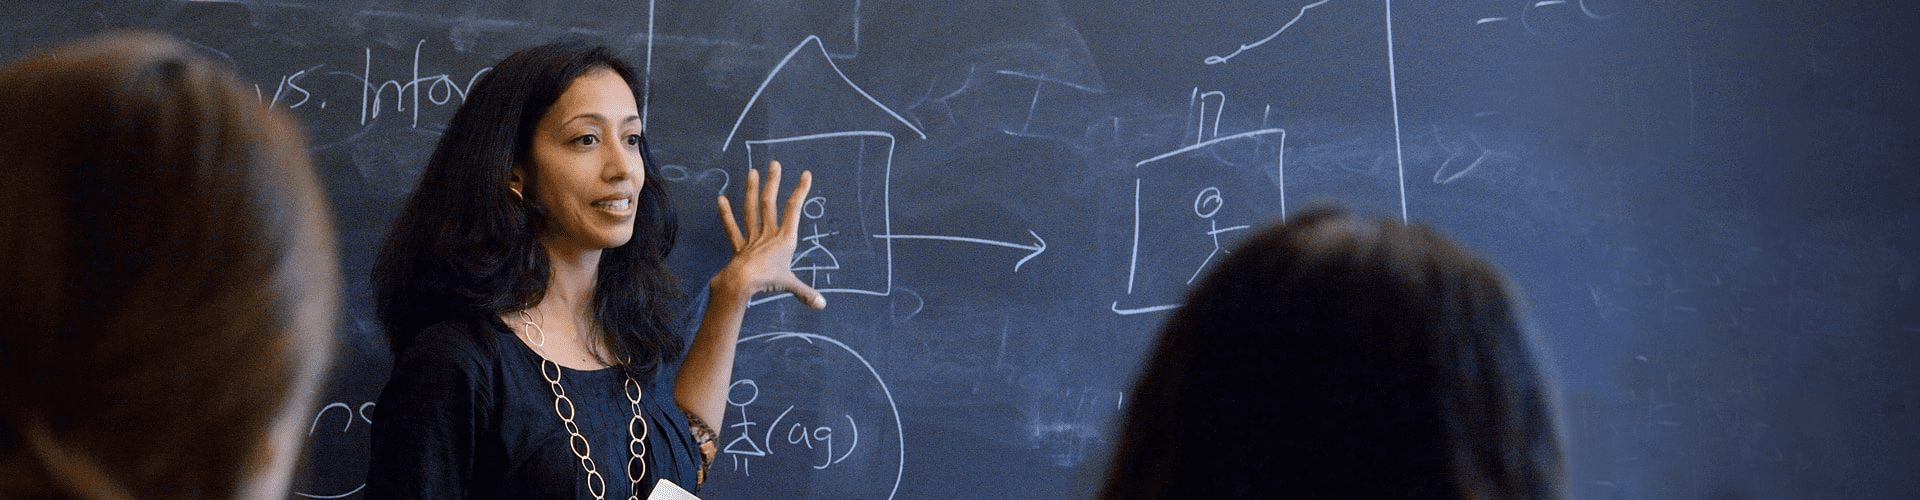 Professor pointing to writing on a chalkboard